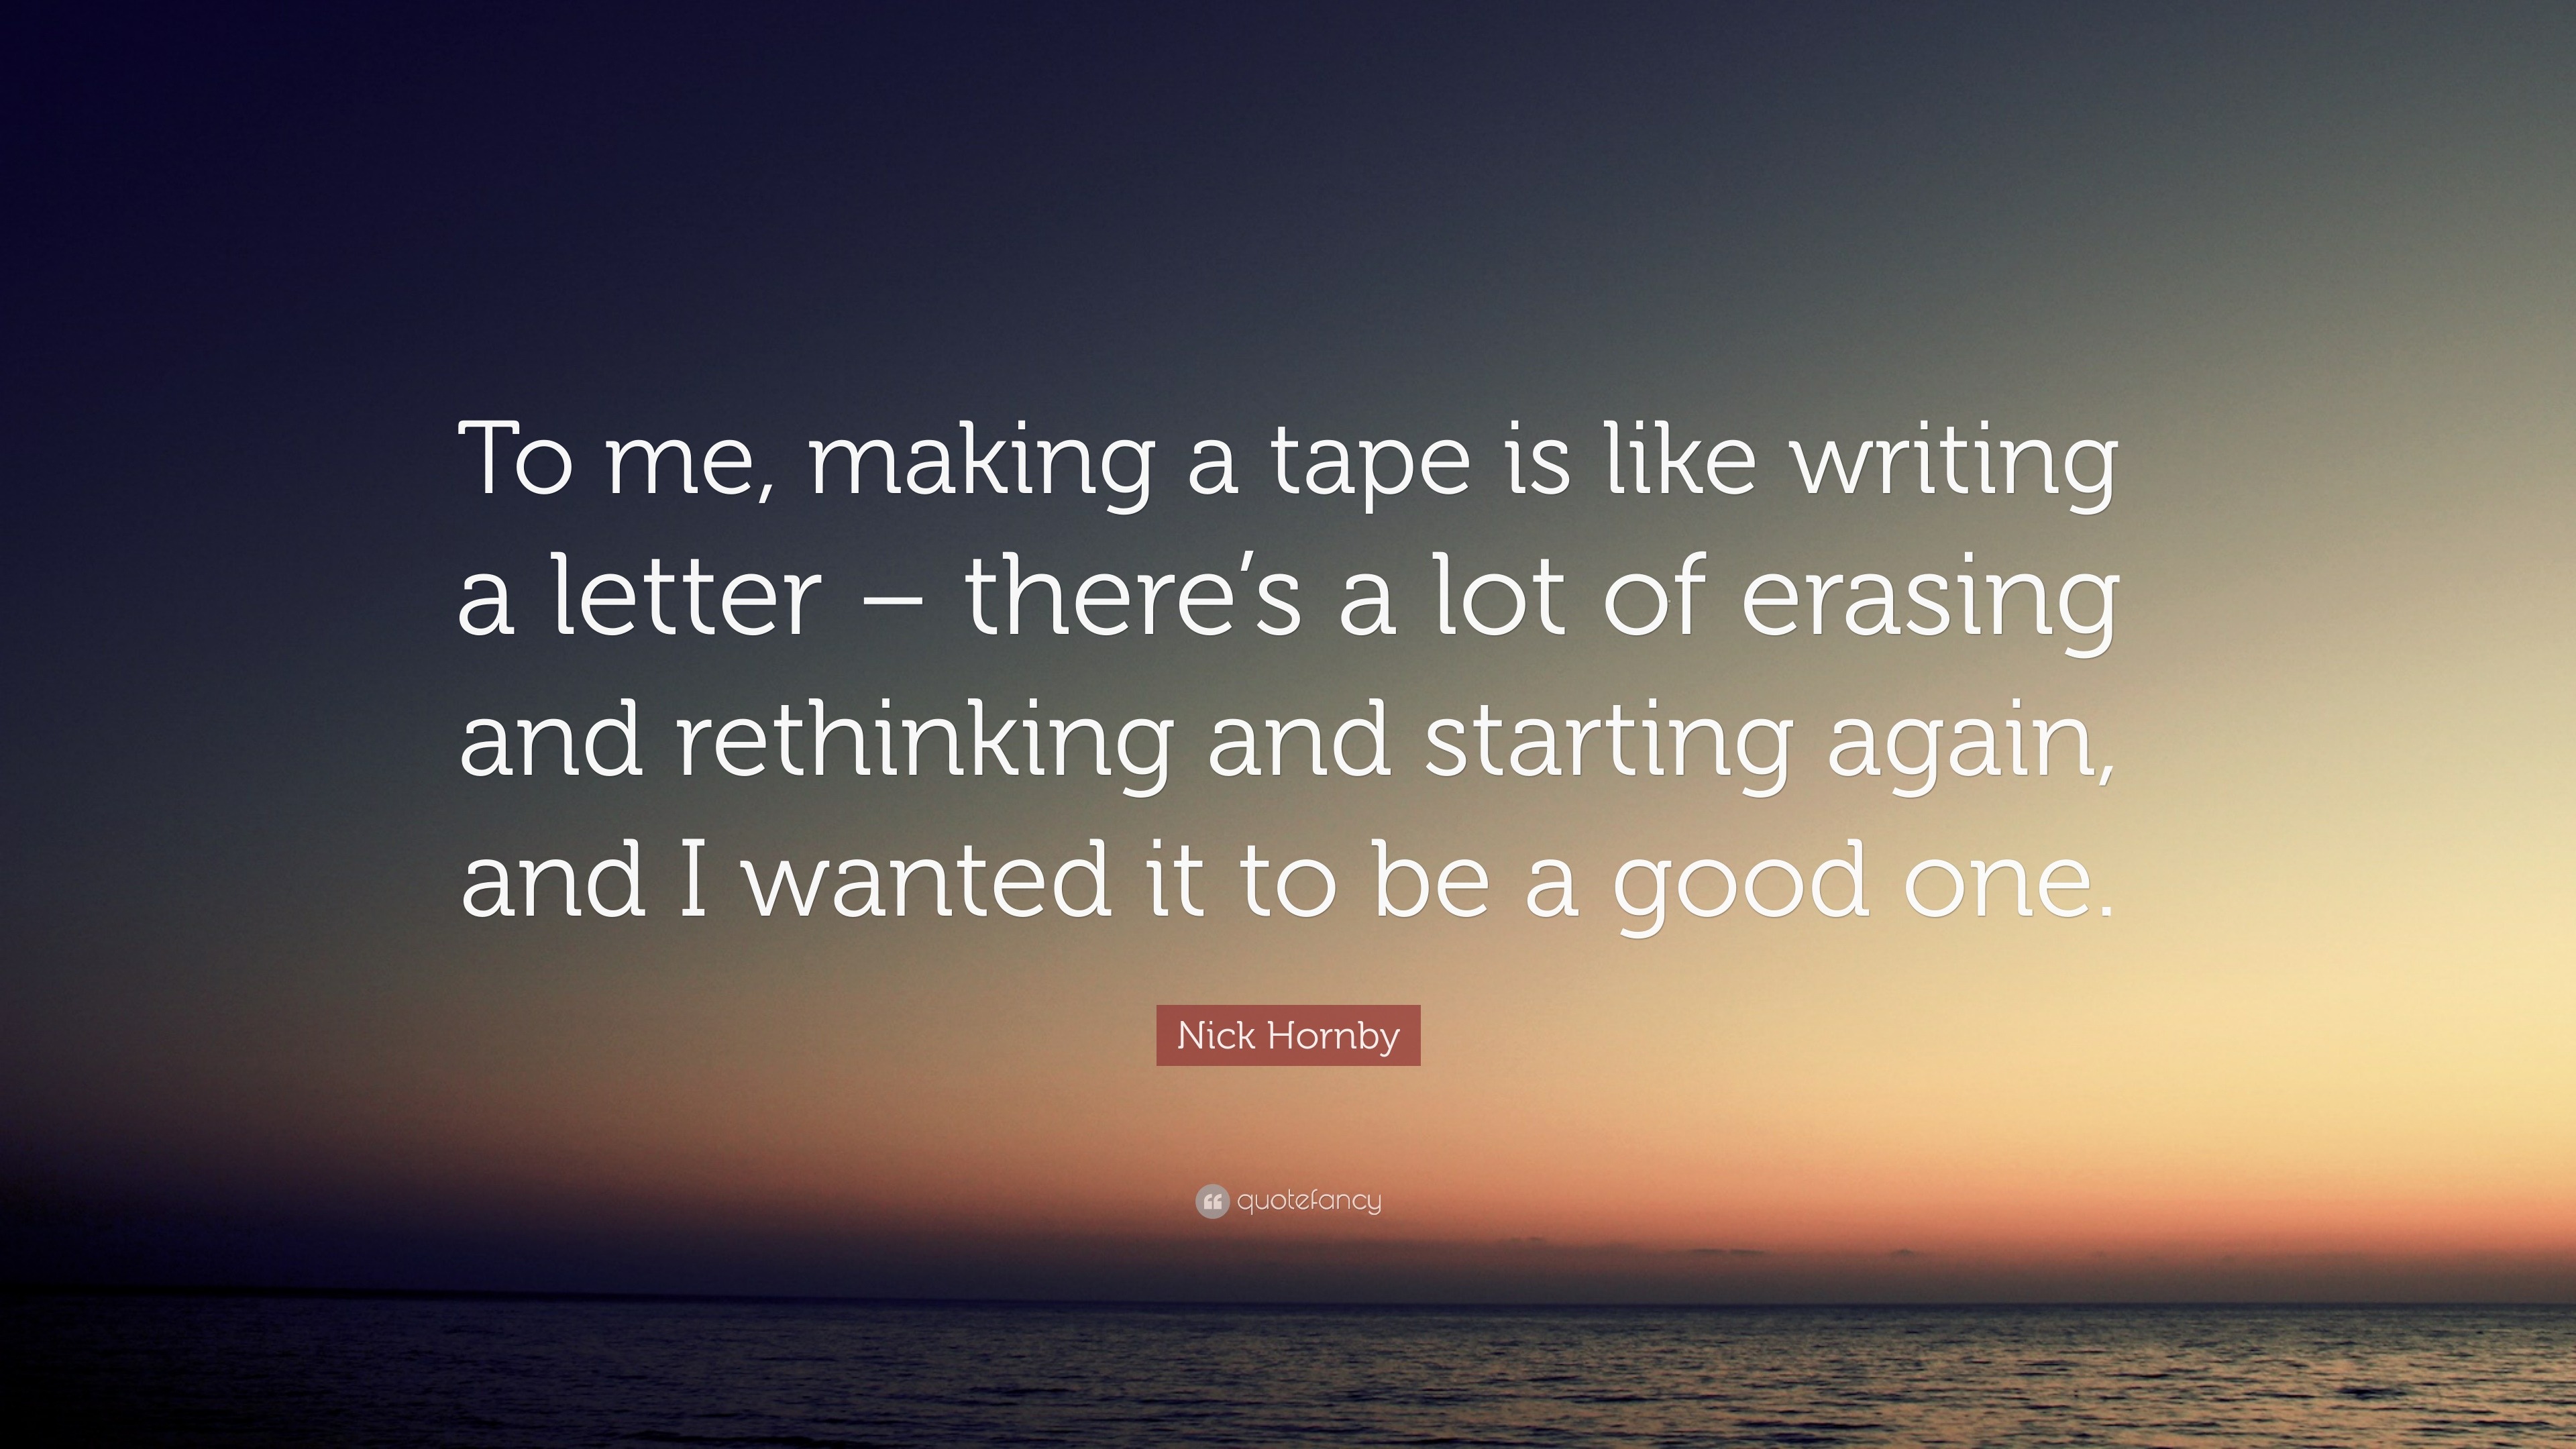 https://quotefancy.com/media/wallpaper/3840x2160/1868752-Nick-Hornby-Quote-To-me-making-a-tape-is-like-writing-a-letter.jpg